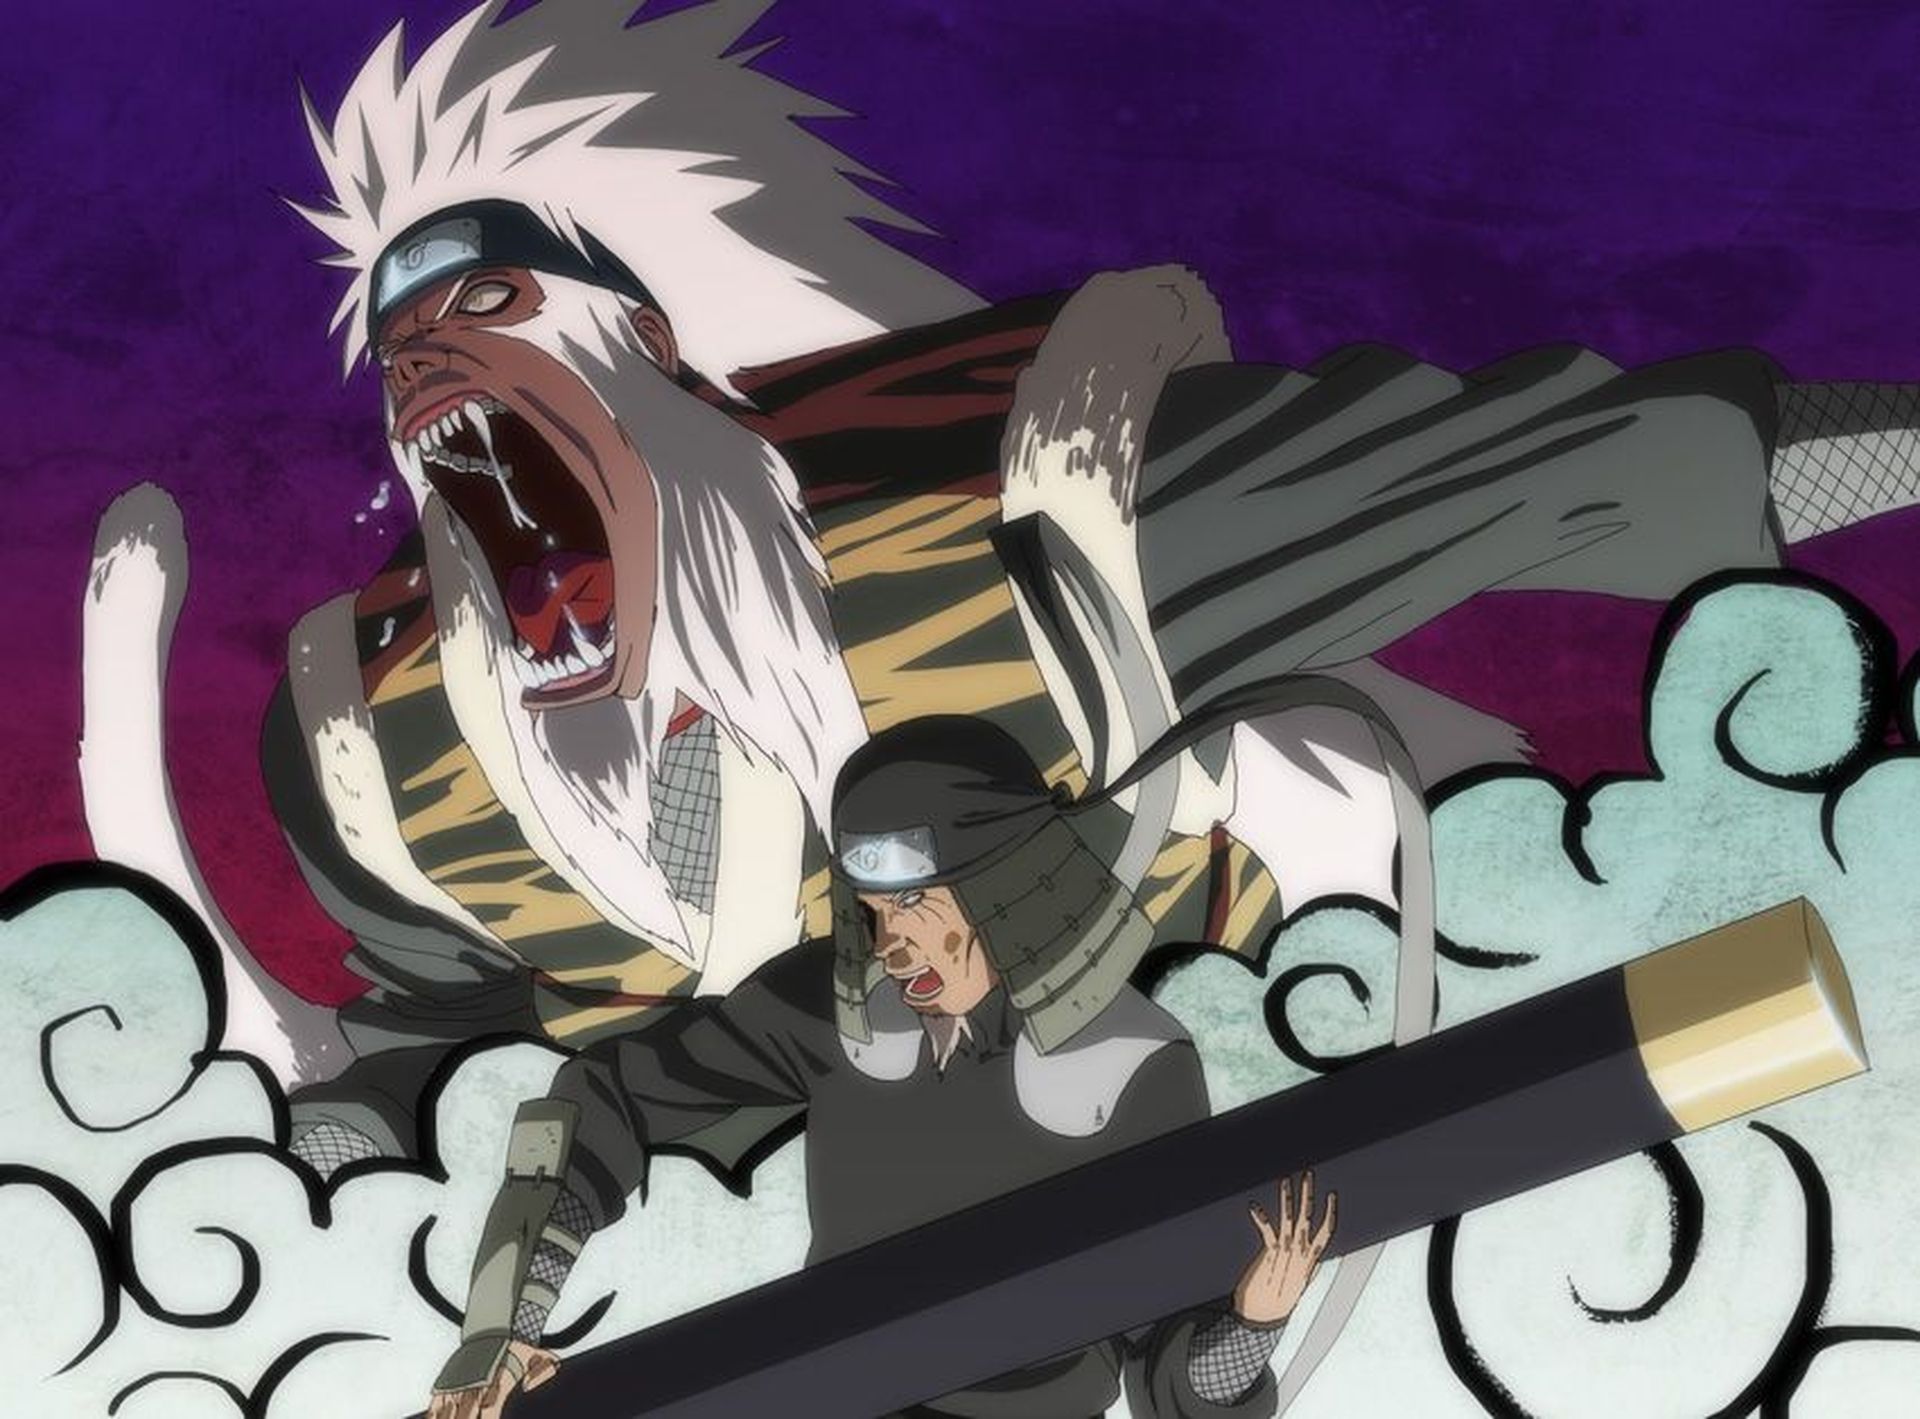 In this article, we are going to be ranking the 25 strongest characters in Naruto from worst to best so you know the definitive tier list in the Naruto series.